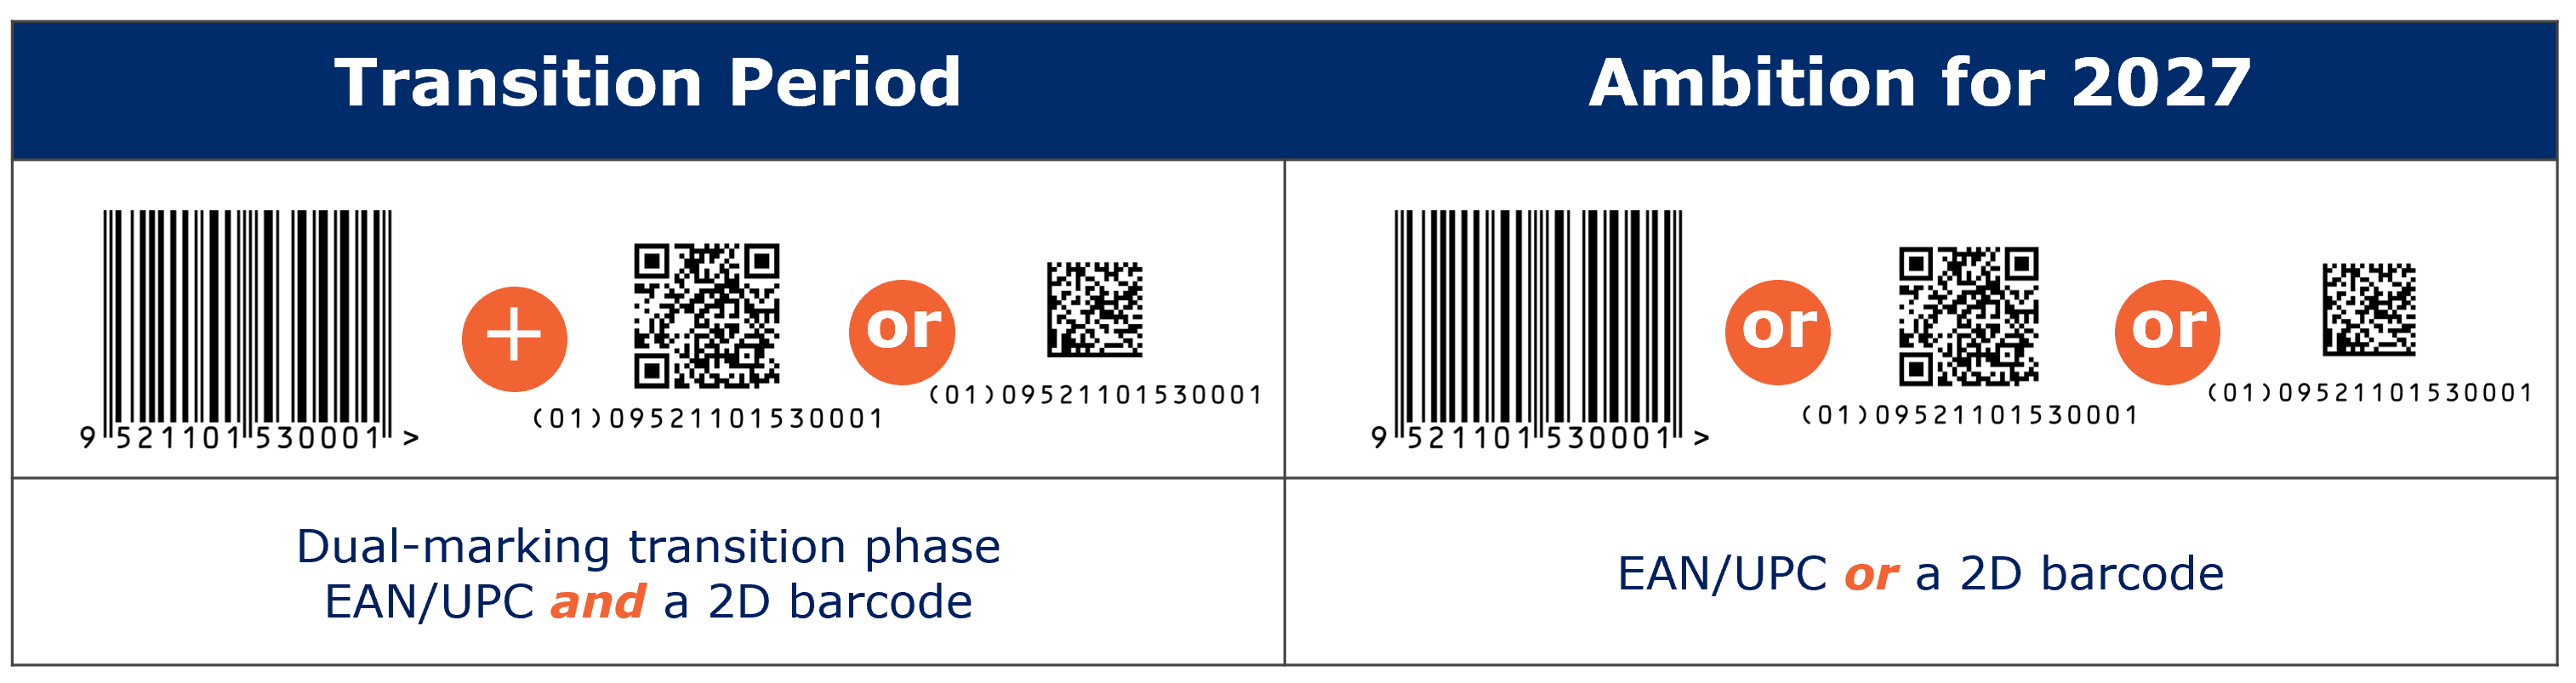 Simple graphic showing that in the transition period, products should have an EAN/UPC barcode and either a QR Code with GS1 Digital Link or a GS1 DataMatrix. After transition any one of those three will be all that's needed